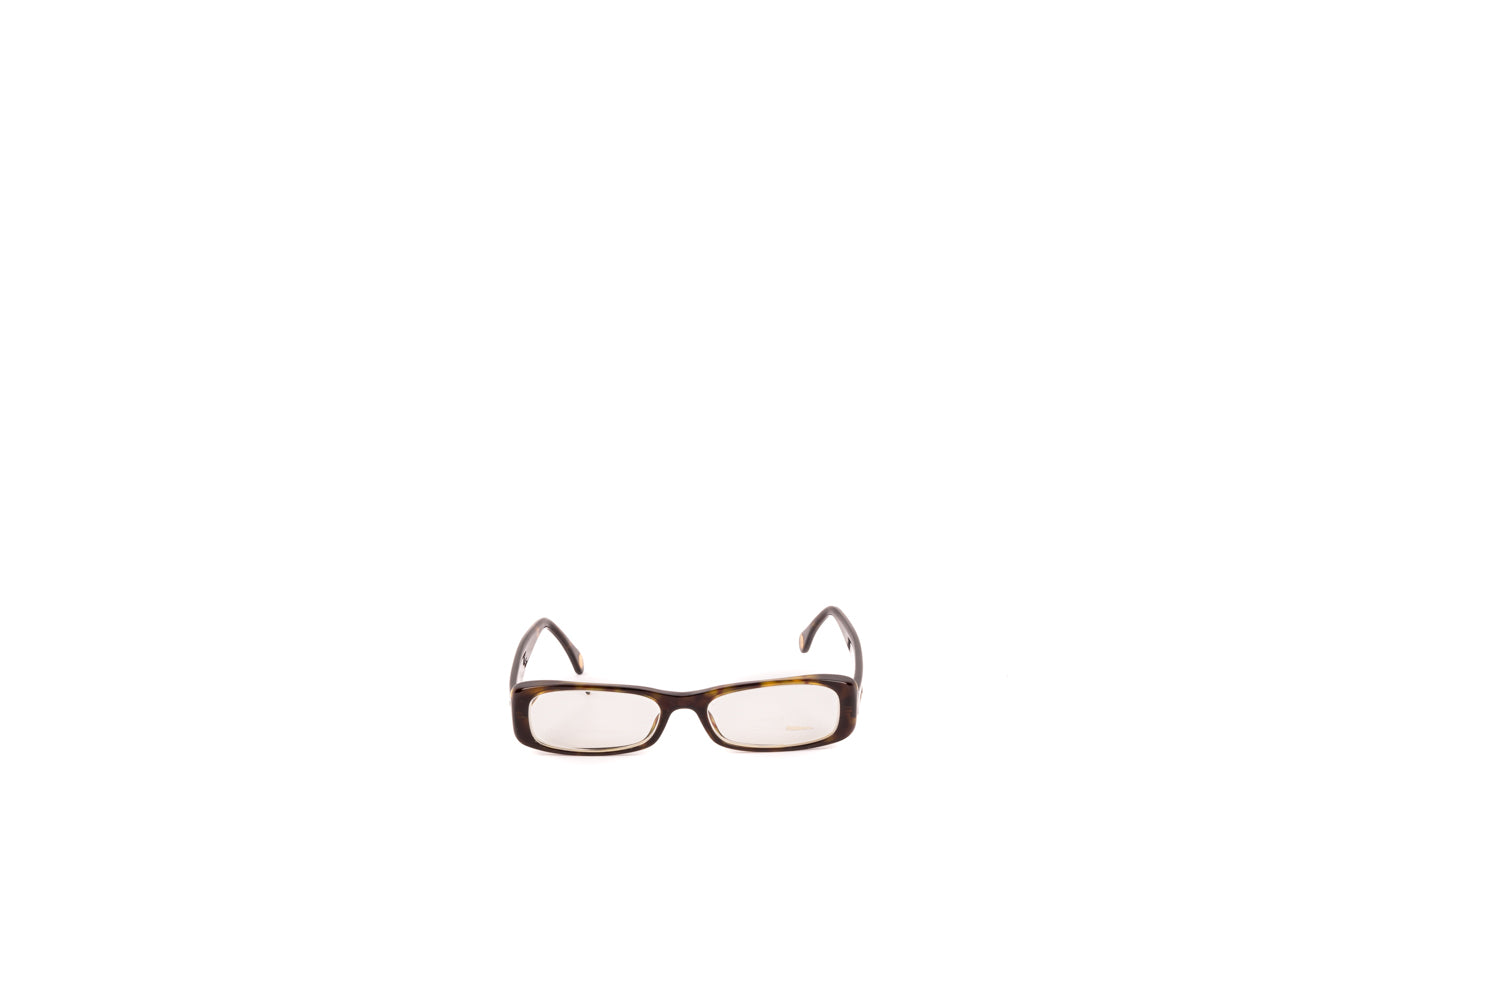 Brown Oval Glasses